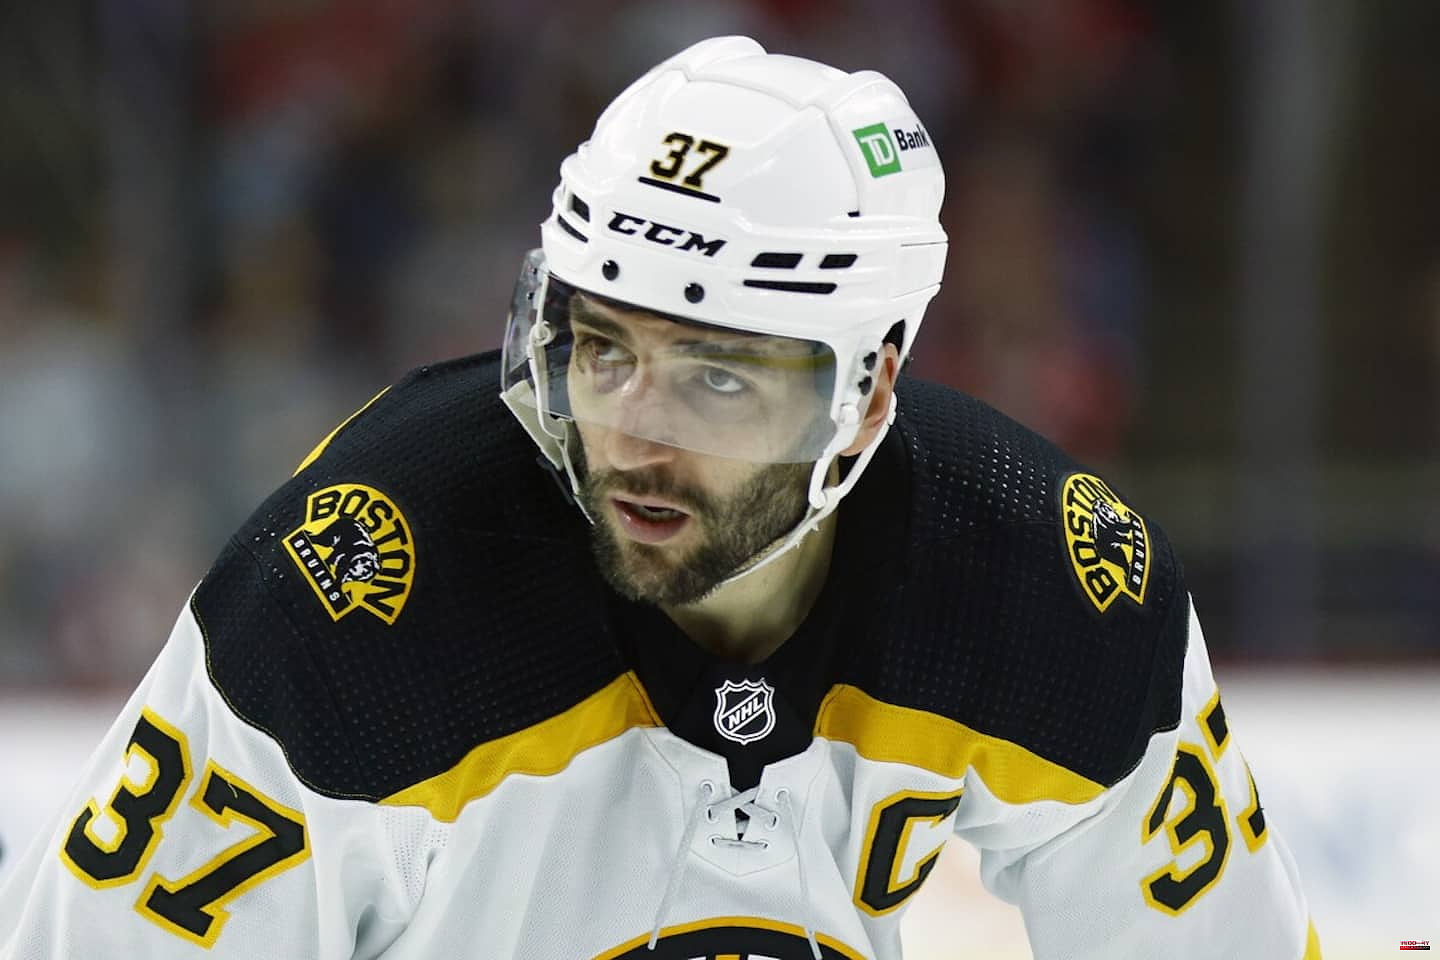 A fifth Selke trophy for Patrice Bergeron?